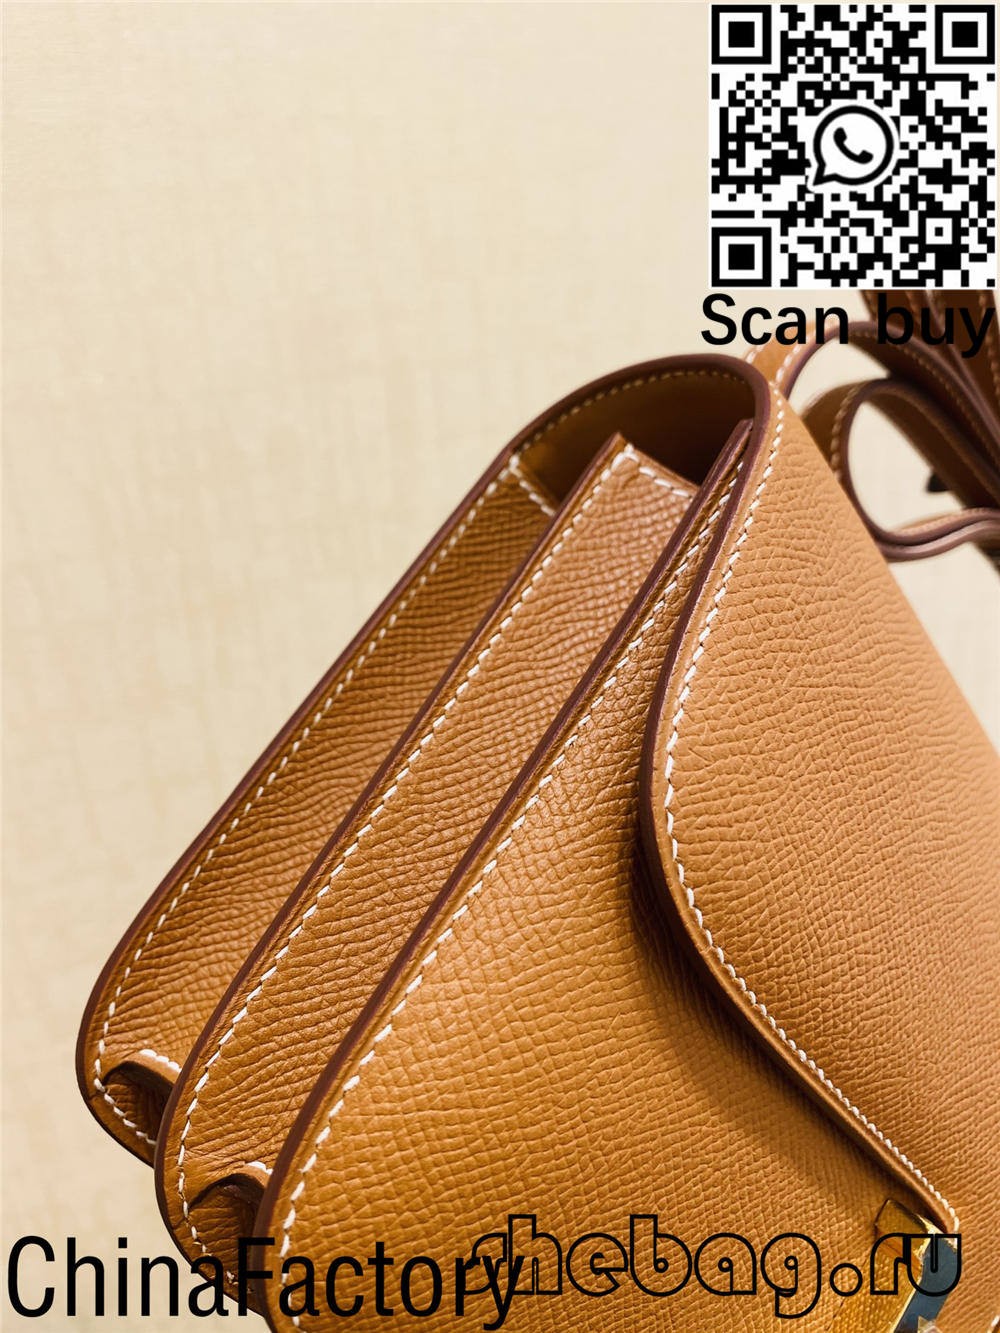 Where can I buy hermes h bag replica cheap and high quality? (2022 updated)-Best Quality Fake designer Bag Review, Replica designer bag ru